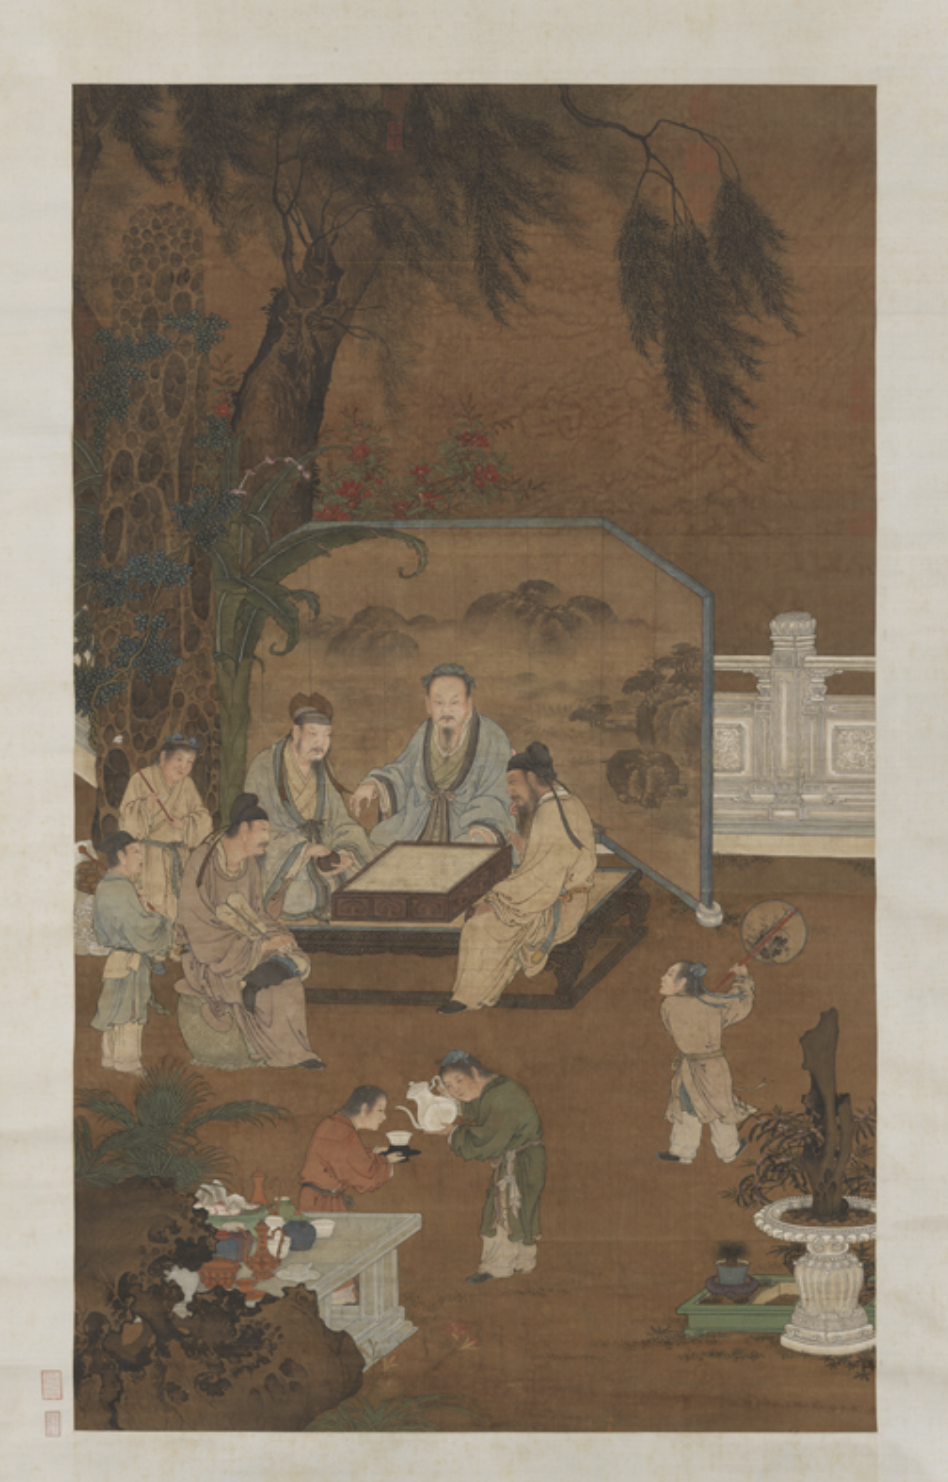 elegant pursuits of the literati the eighteen scholars by an anonymous ming artist